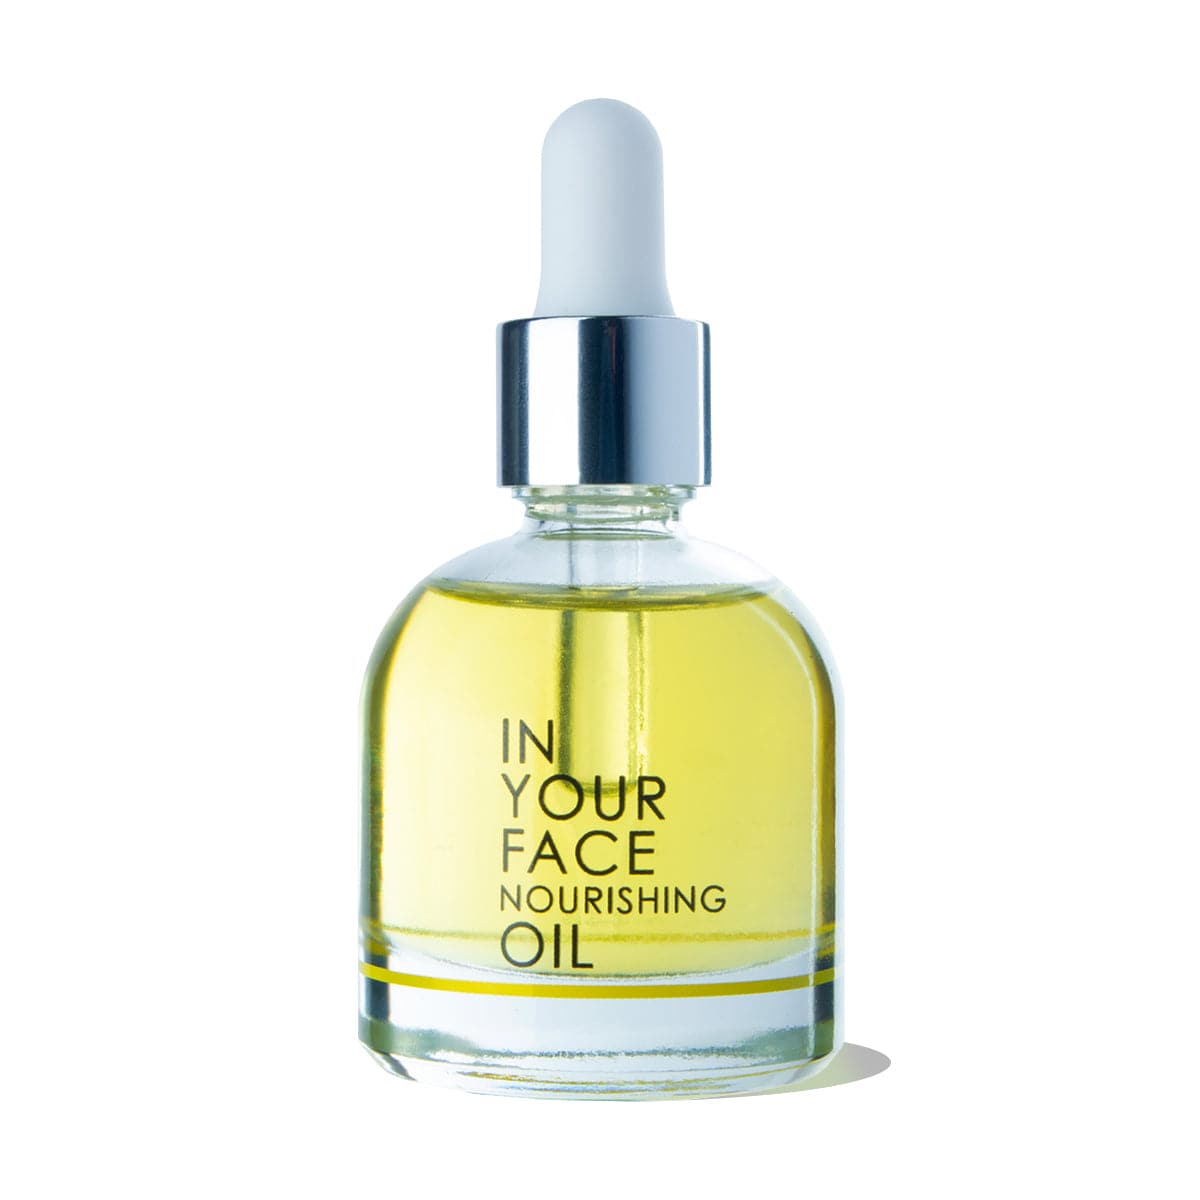 a clean image of the IN YOUR FACE NOURISHING OIL on a white background. The oil is in a clear bottle with a squeezable dropper inside. The oil is a beautiful clear golden color.